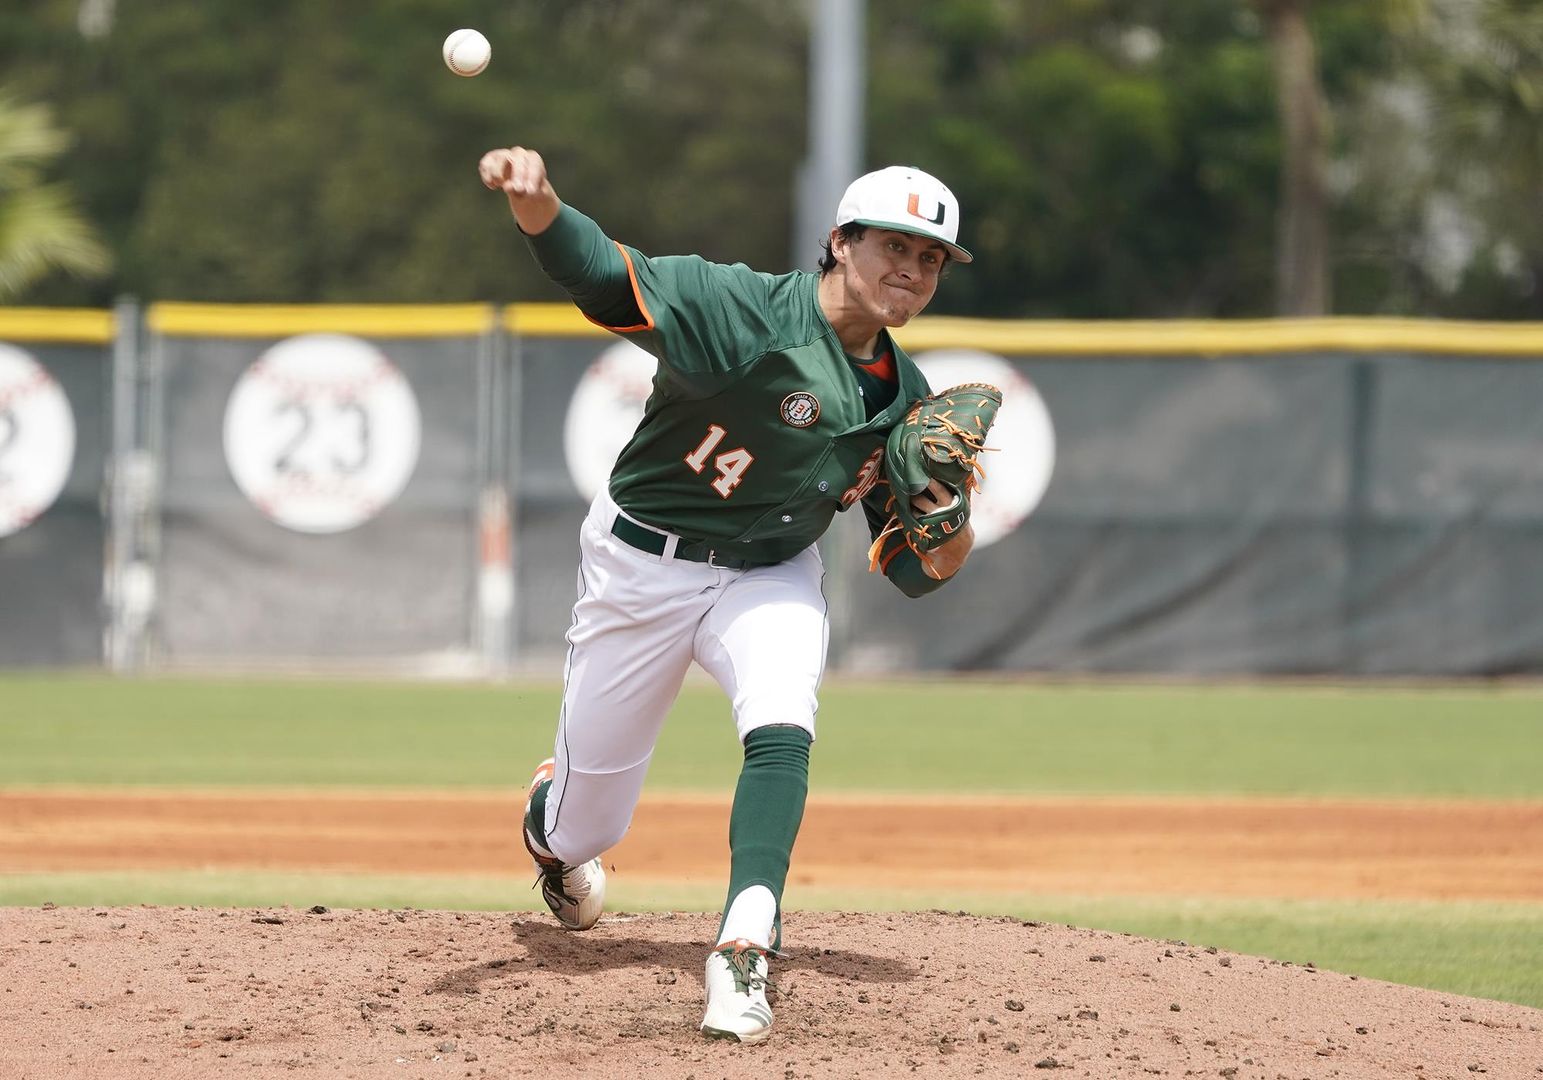 McKendry Named ACC Pitcher of the Week